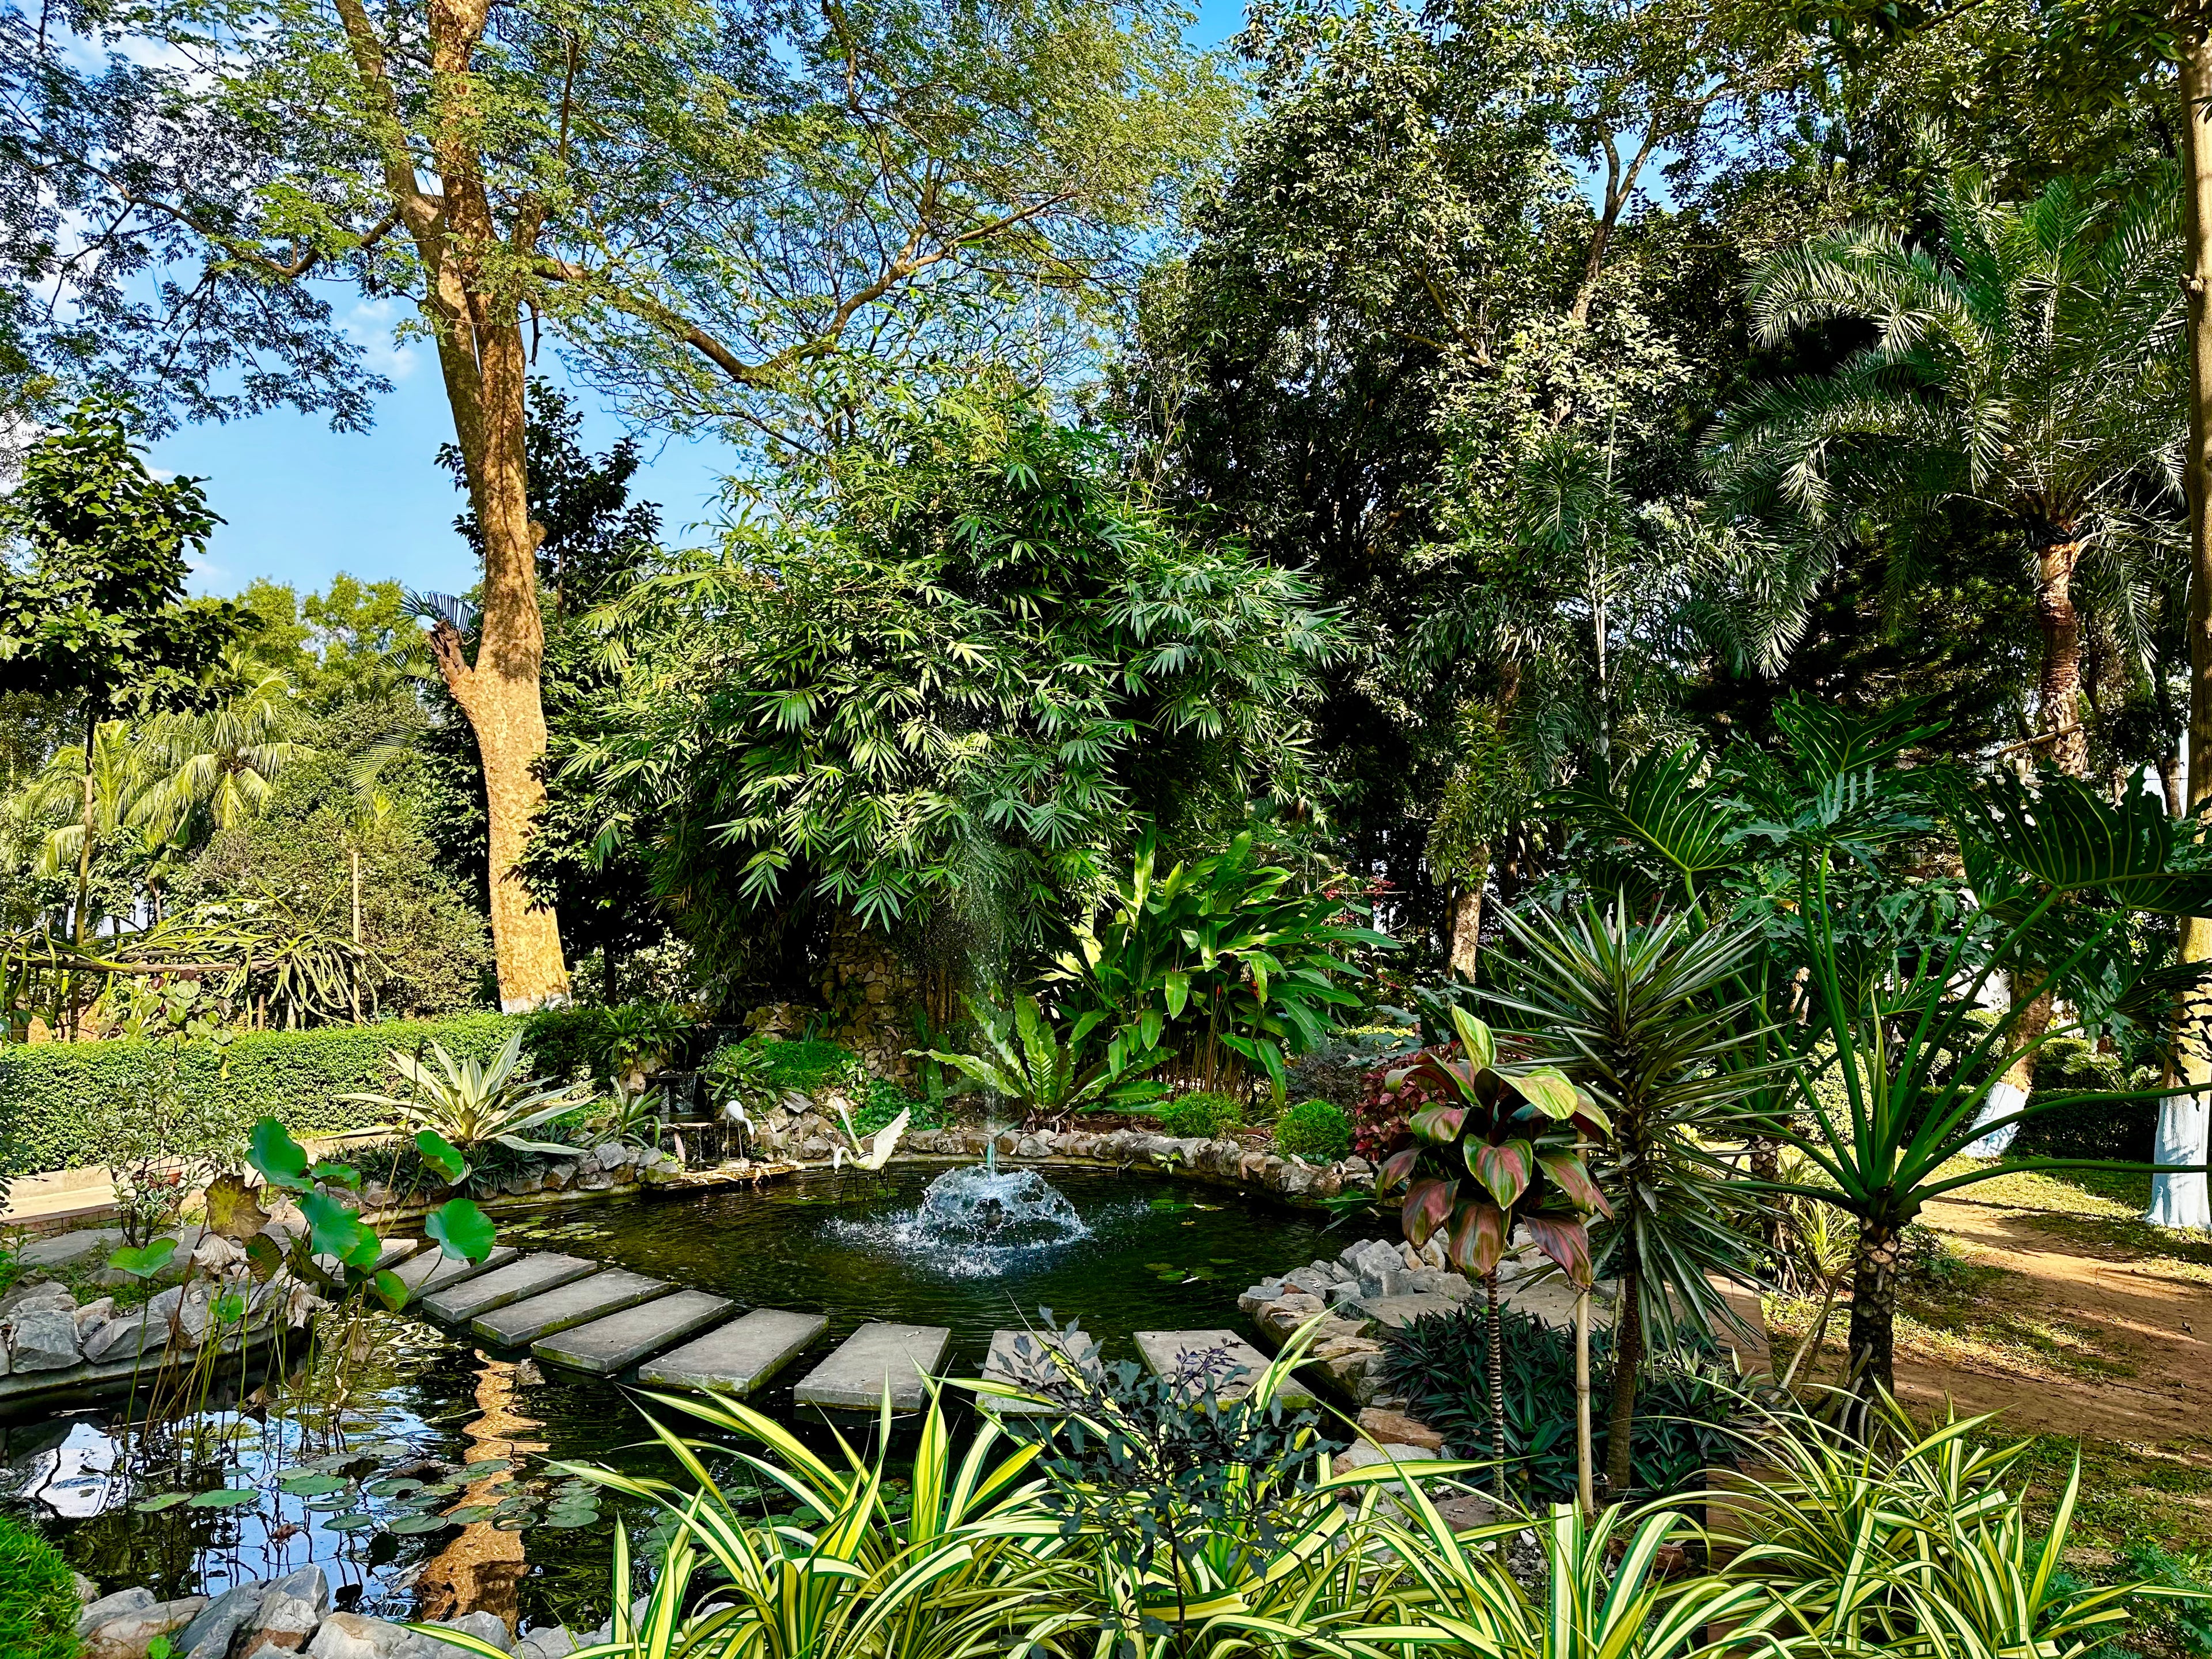 Tranquil pond with stepping stones and a heron statue at Barnochata, an enchanting Dhaka hotel and resort in Savar surrounded by lush foliage.